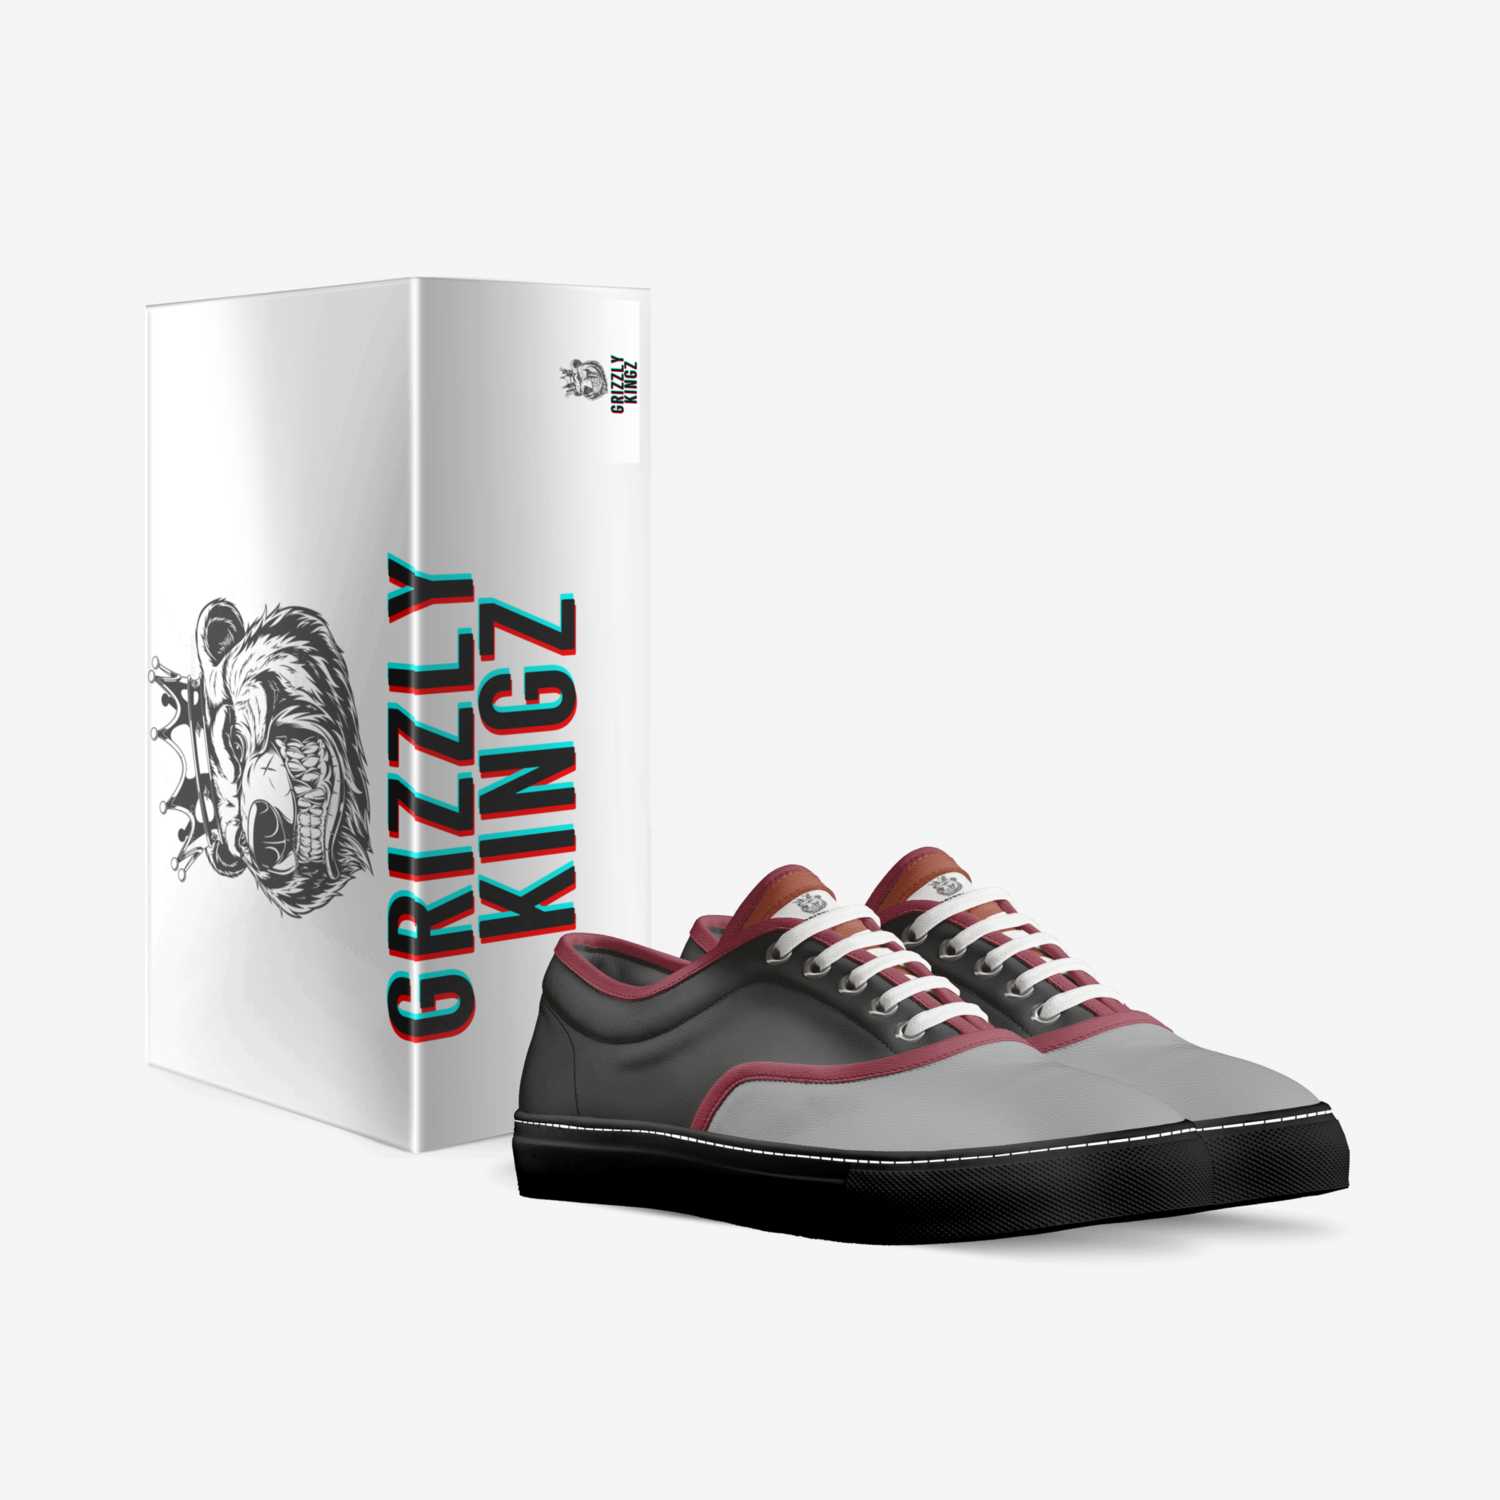 Grizzly Kingz  custom made in Italy shoes by Richard Evans | Box view